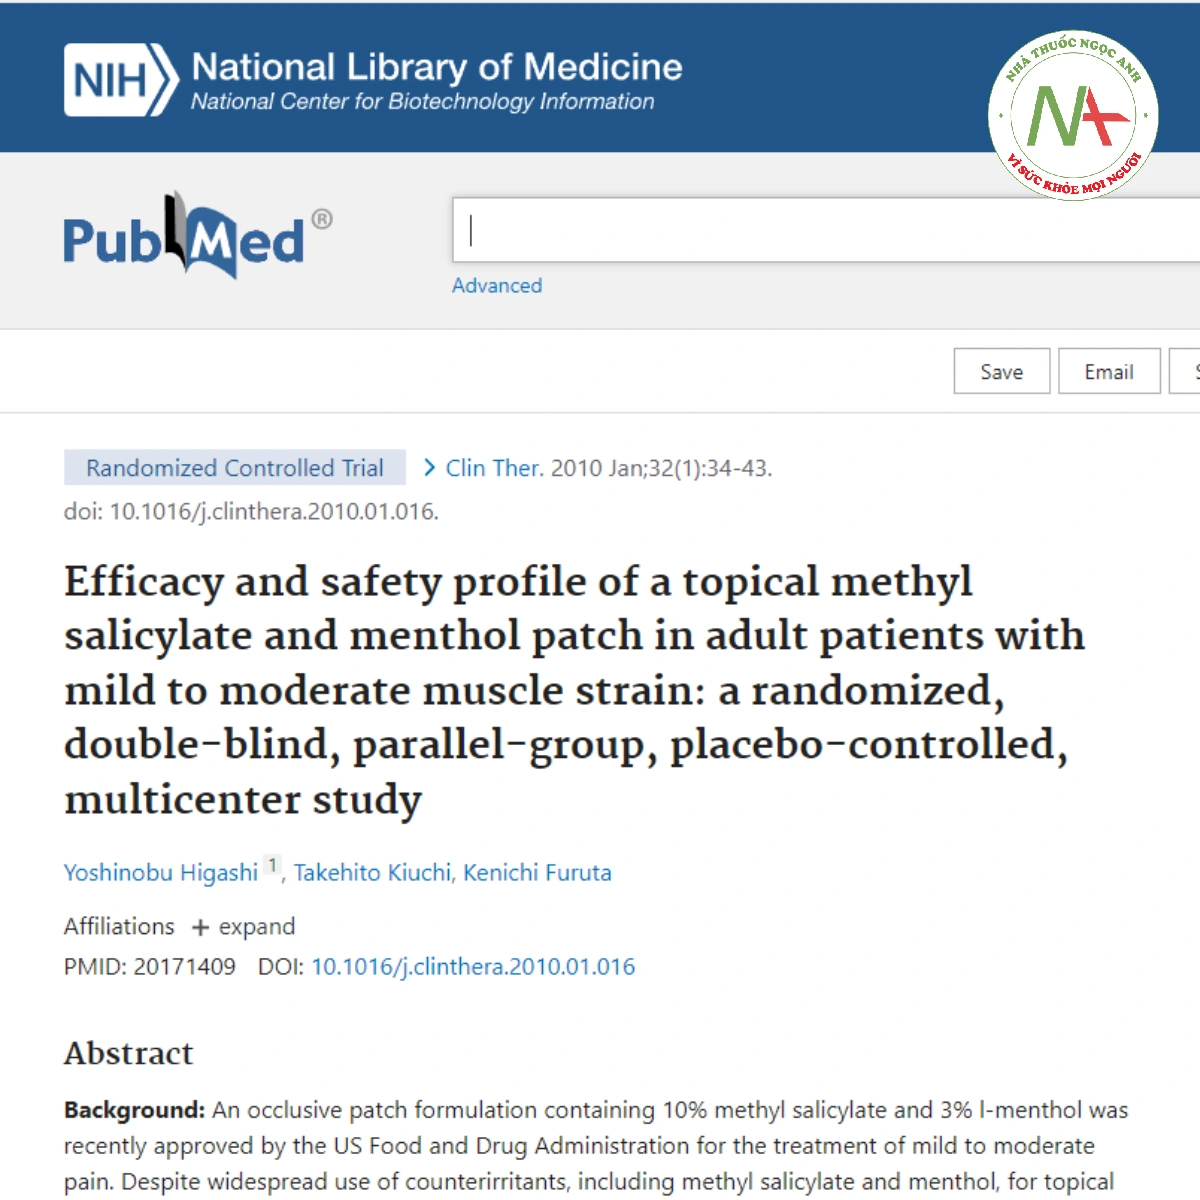 Efficacy and safety profile of a topical methyl salicylate and menthol patch in adult patients with mild to moderate muscle strain: a randomized, double-blind, parallel-group, placebo-controlled, multicenter study